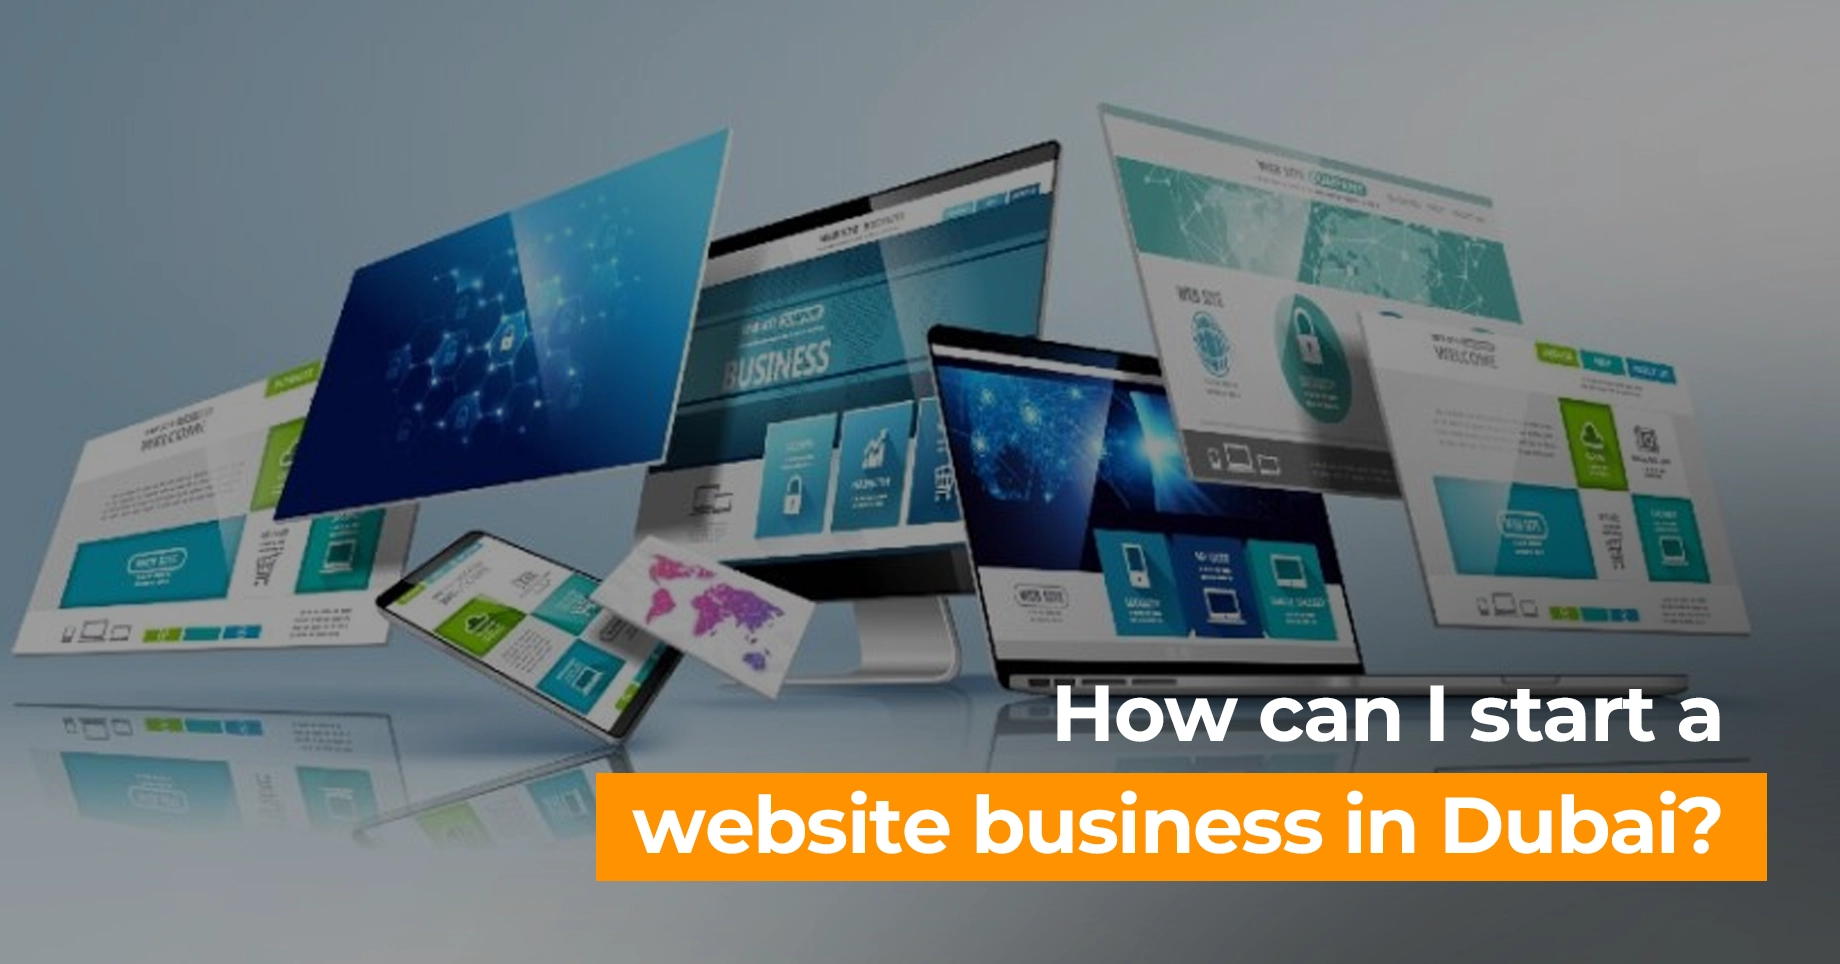 How to start a website business in Dubai